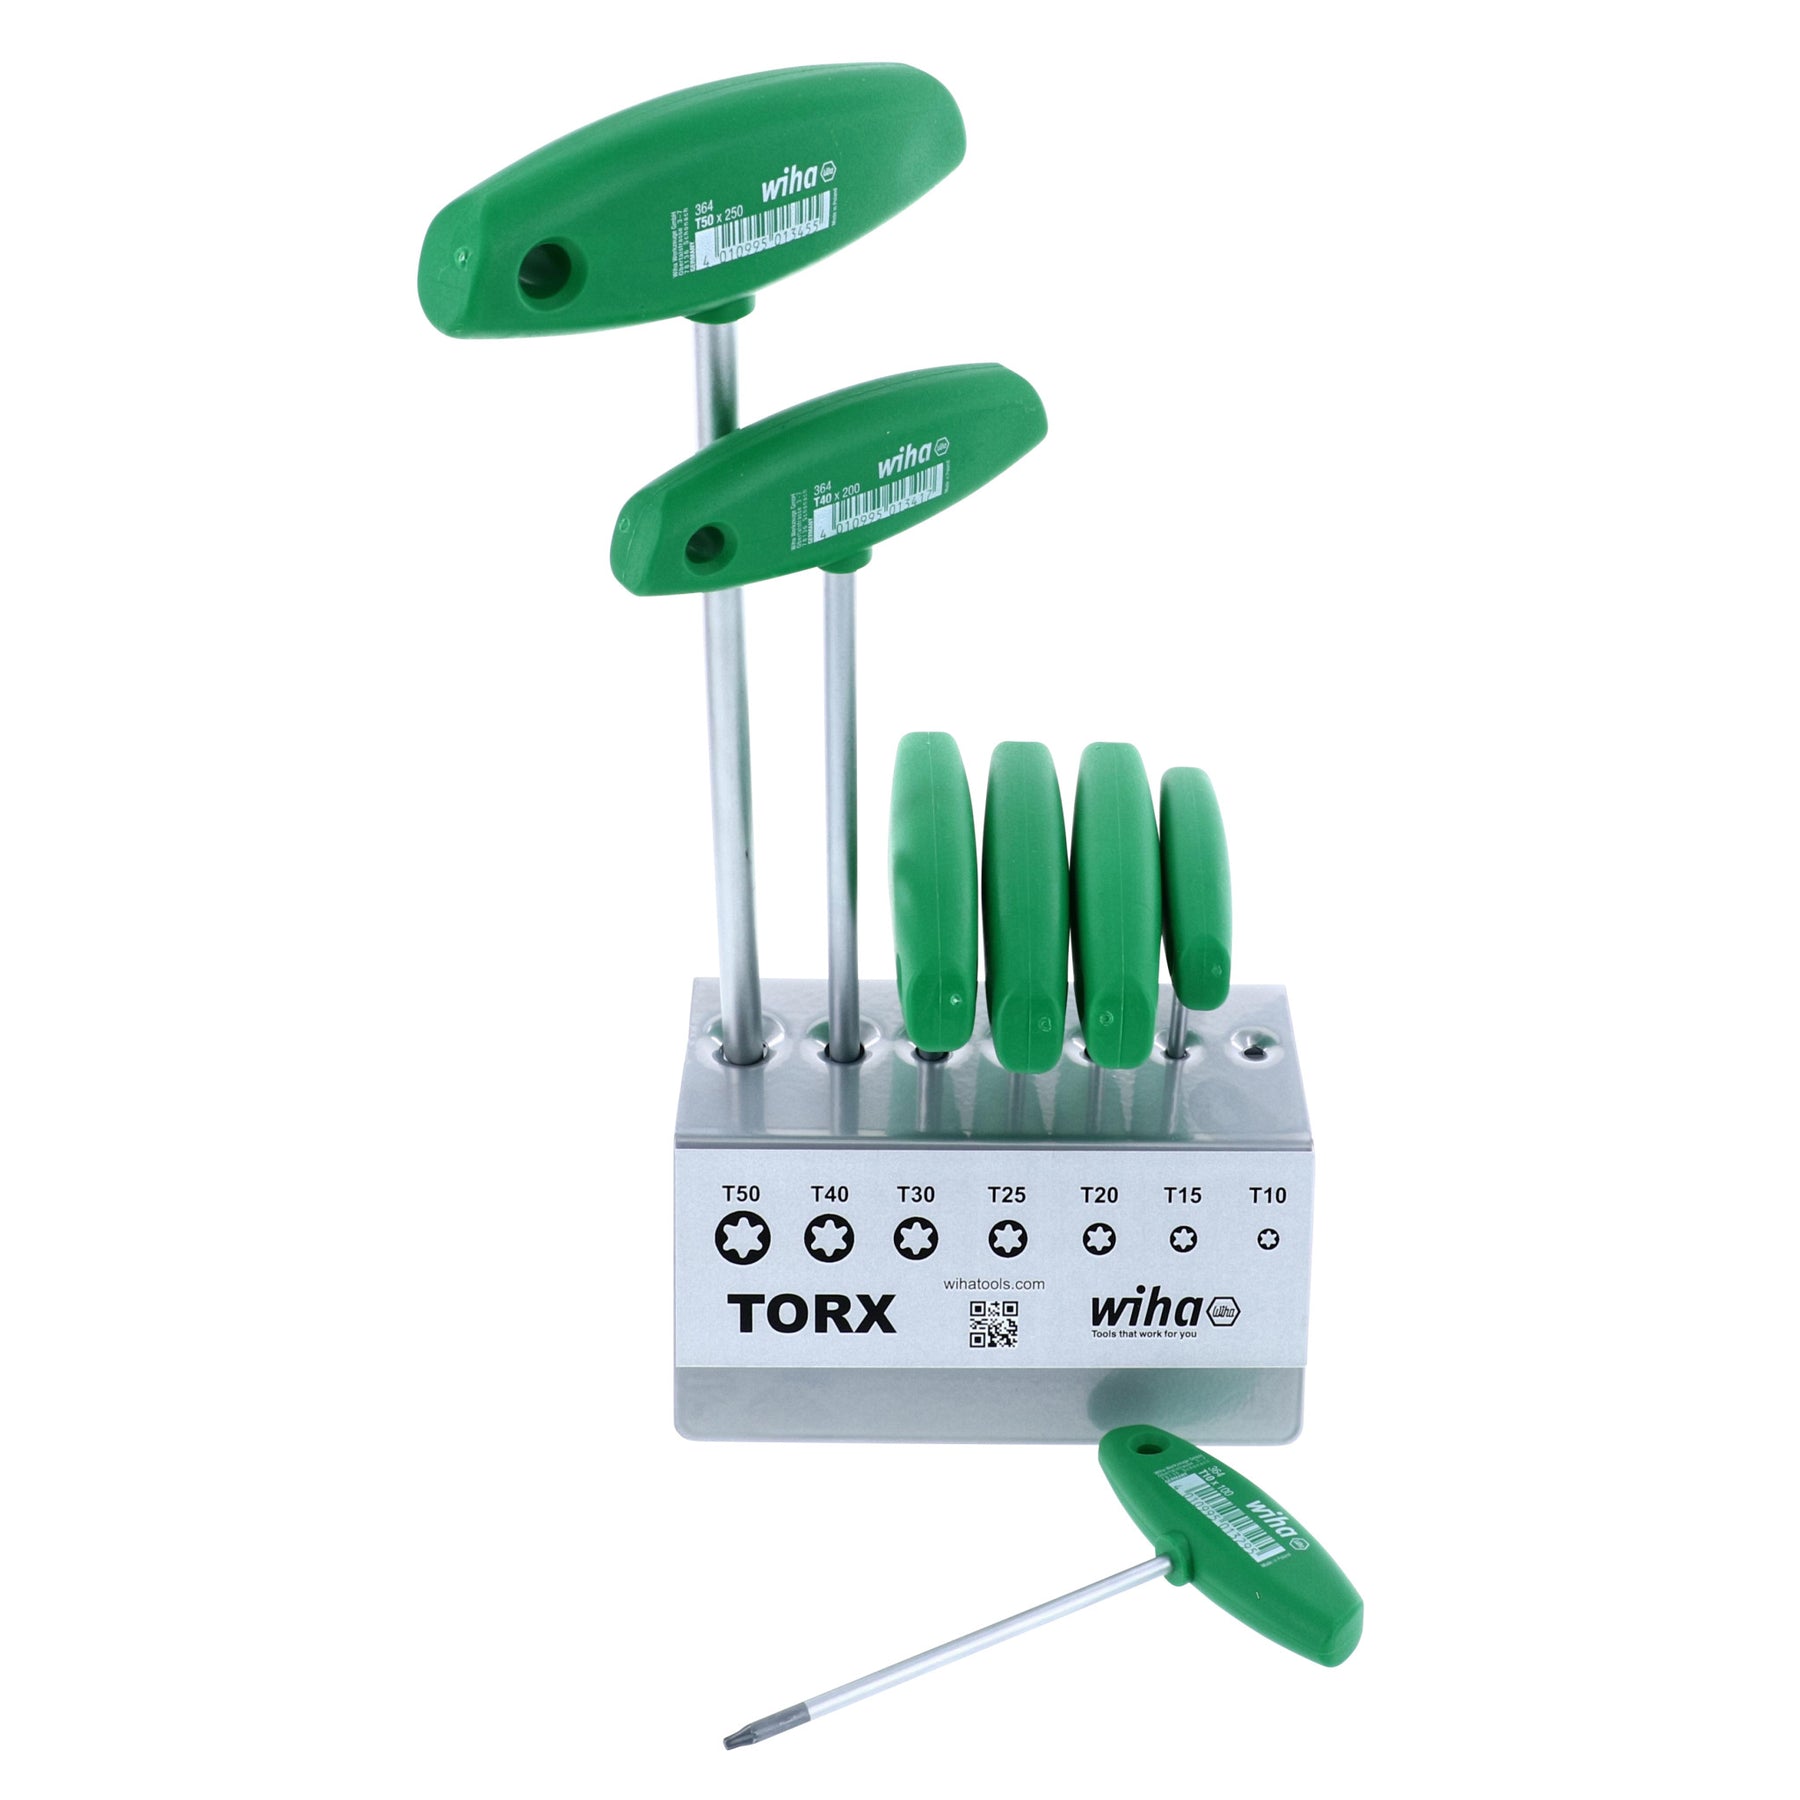 7 Piece Classic Grip Torx T-Handle Set in Stand